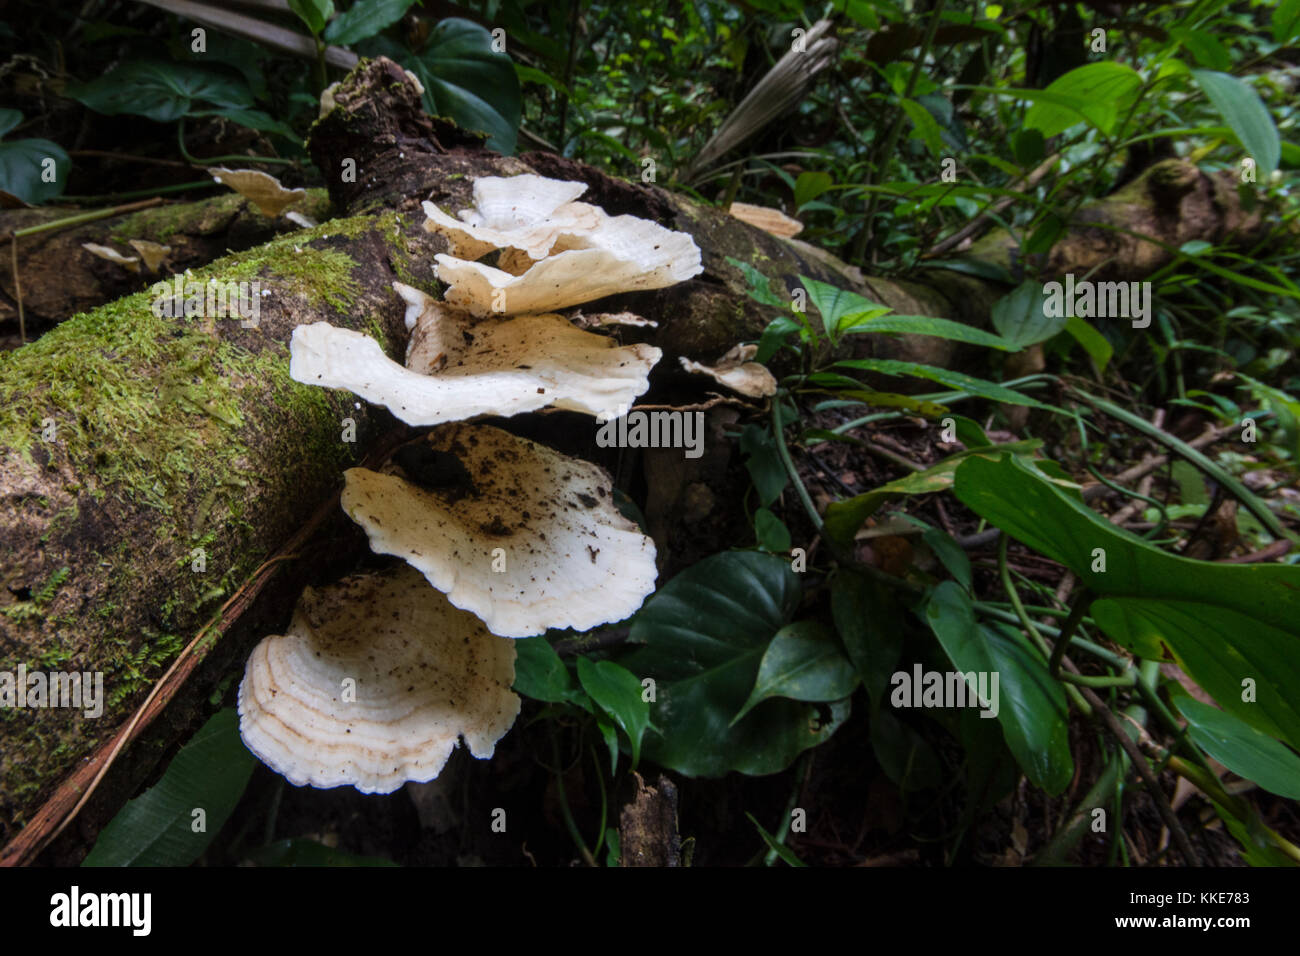 Some sort of tropical mushroom growing on a fallen tree in the jungle. Stock Photo